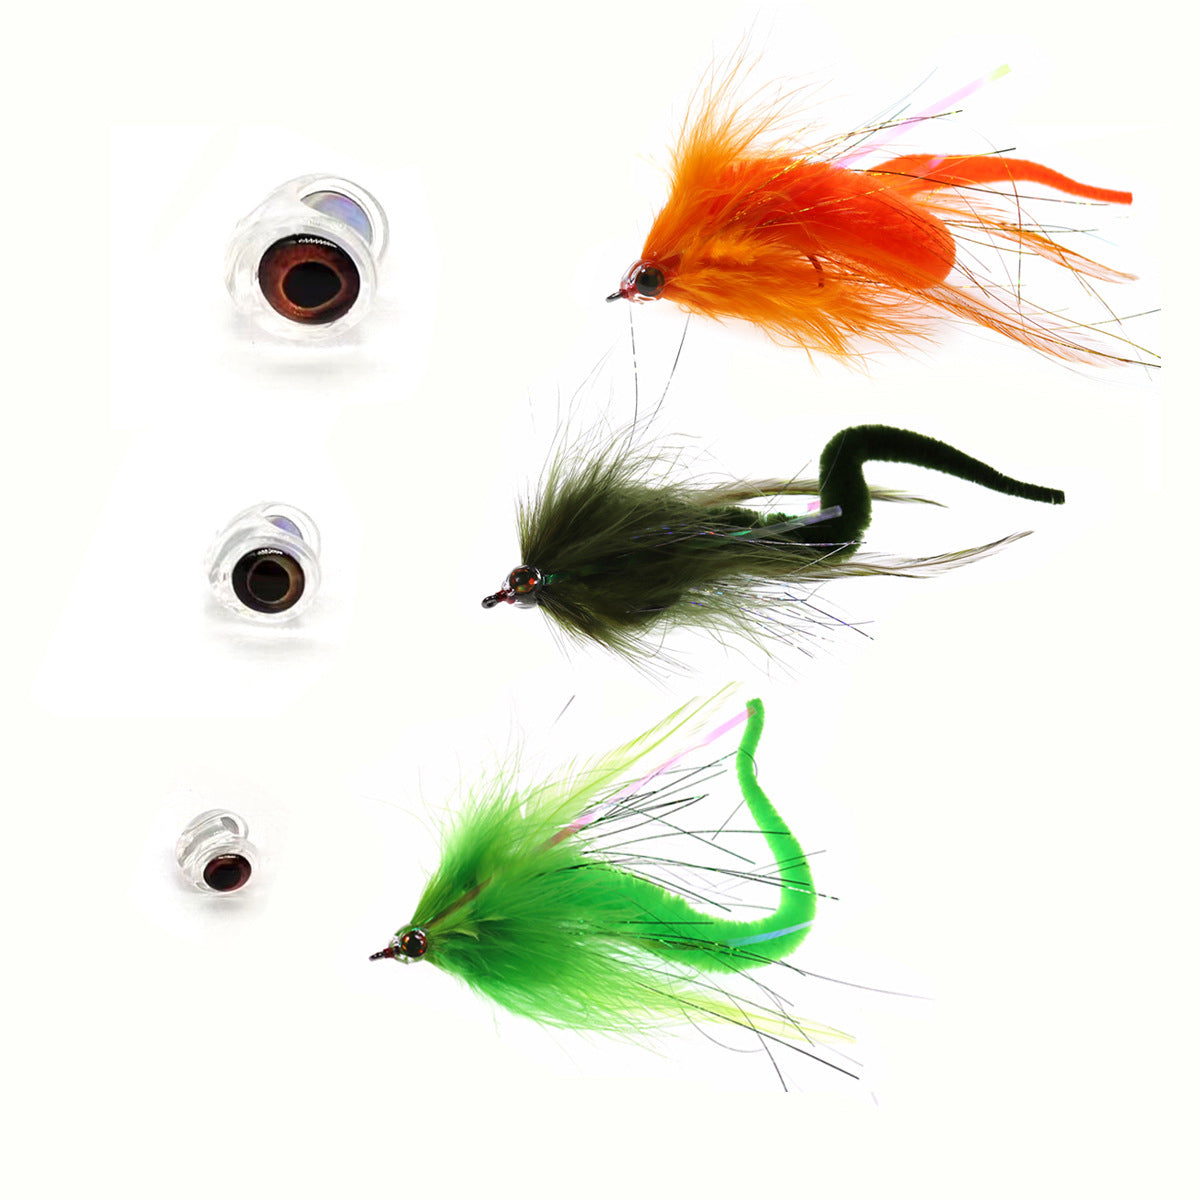 Kylebooker 10pcs Fly Tying Fish Skull Head for Streamer Flies 4mm/6mm/8mm Material Lure Tying Bait Making Fishing Fly with Eyes Bait